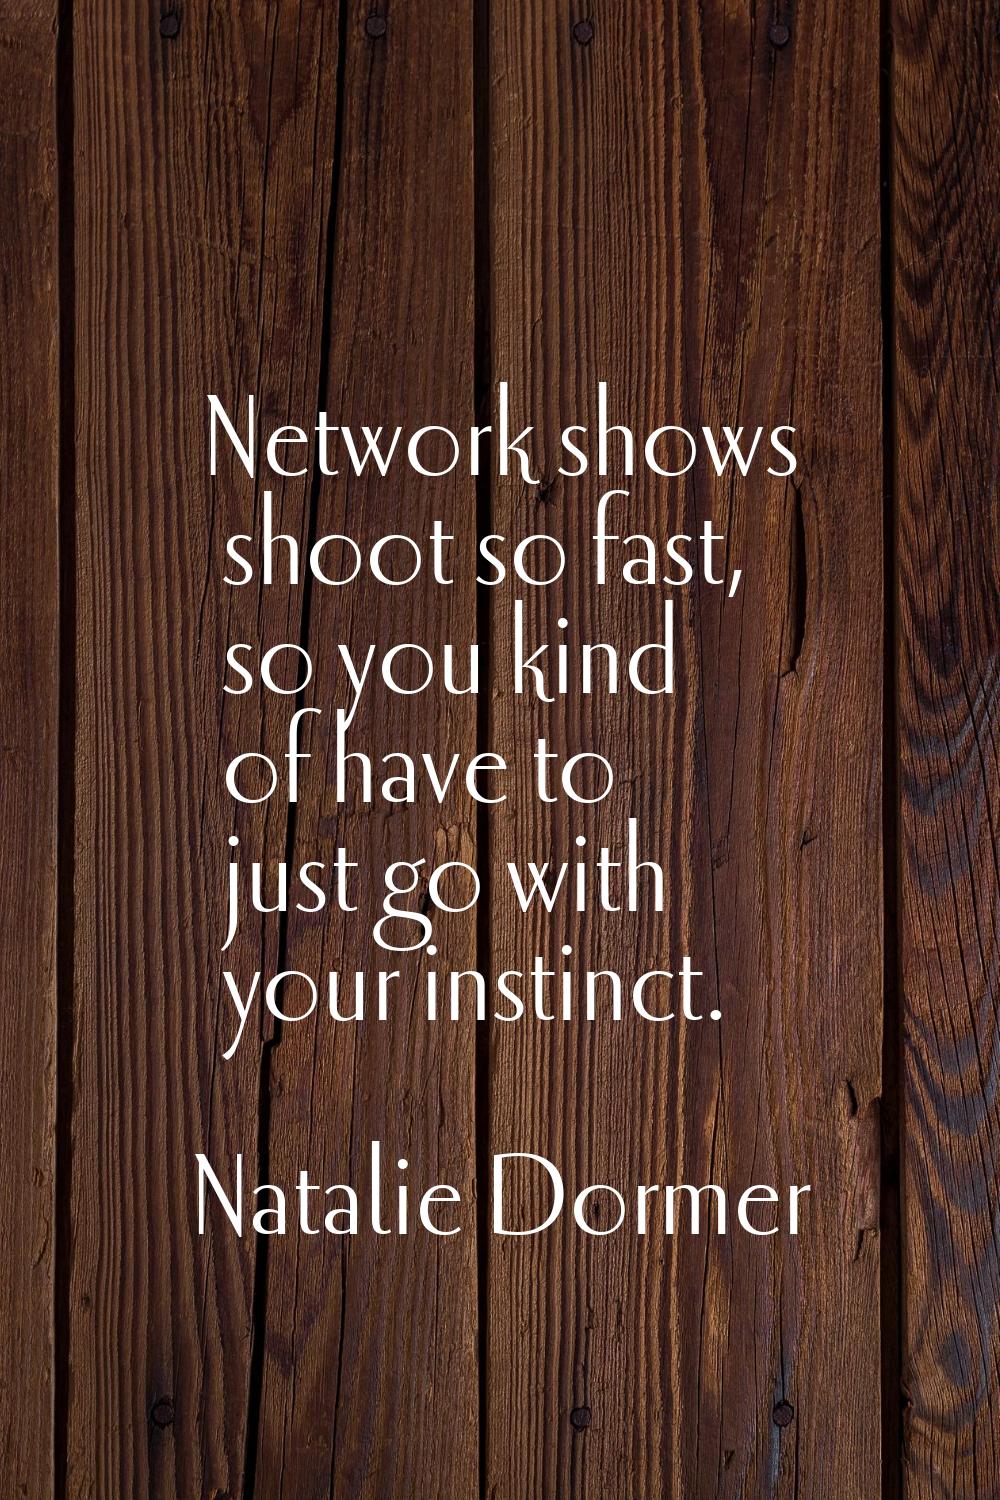 Network shows shoot so fast, so you kind of have to just go with your instinct.